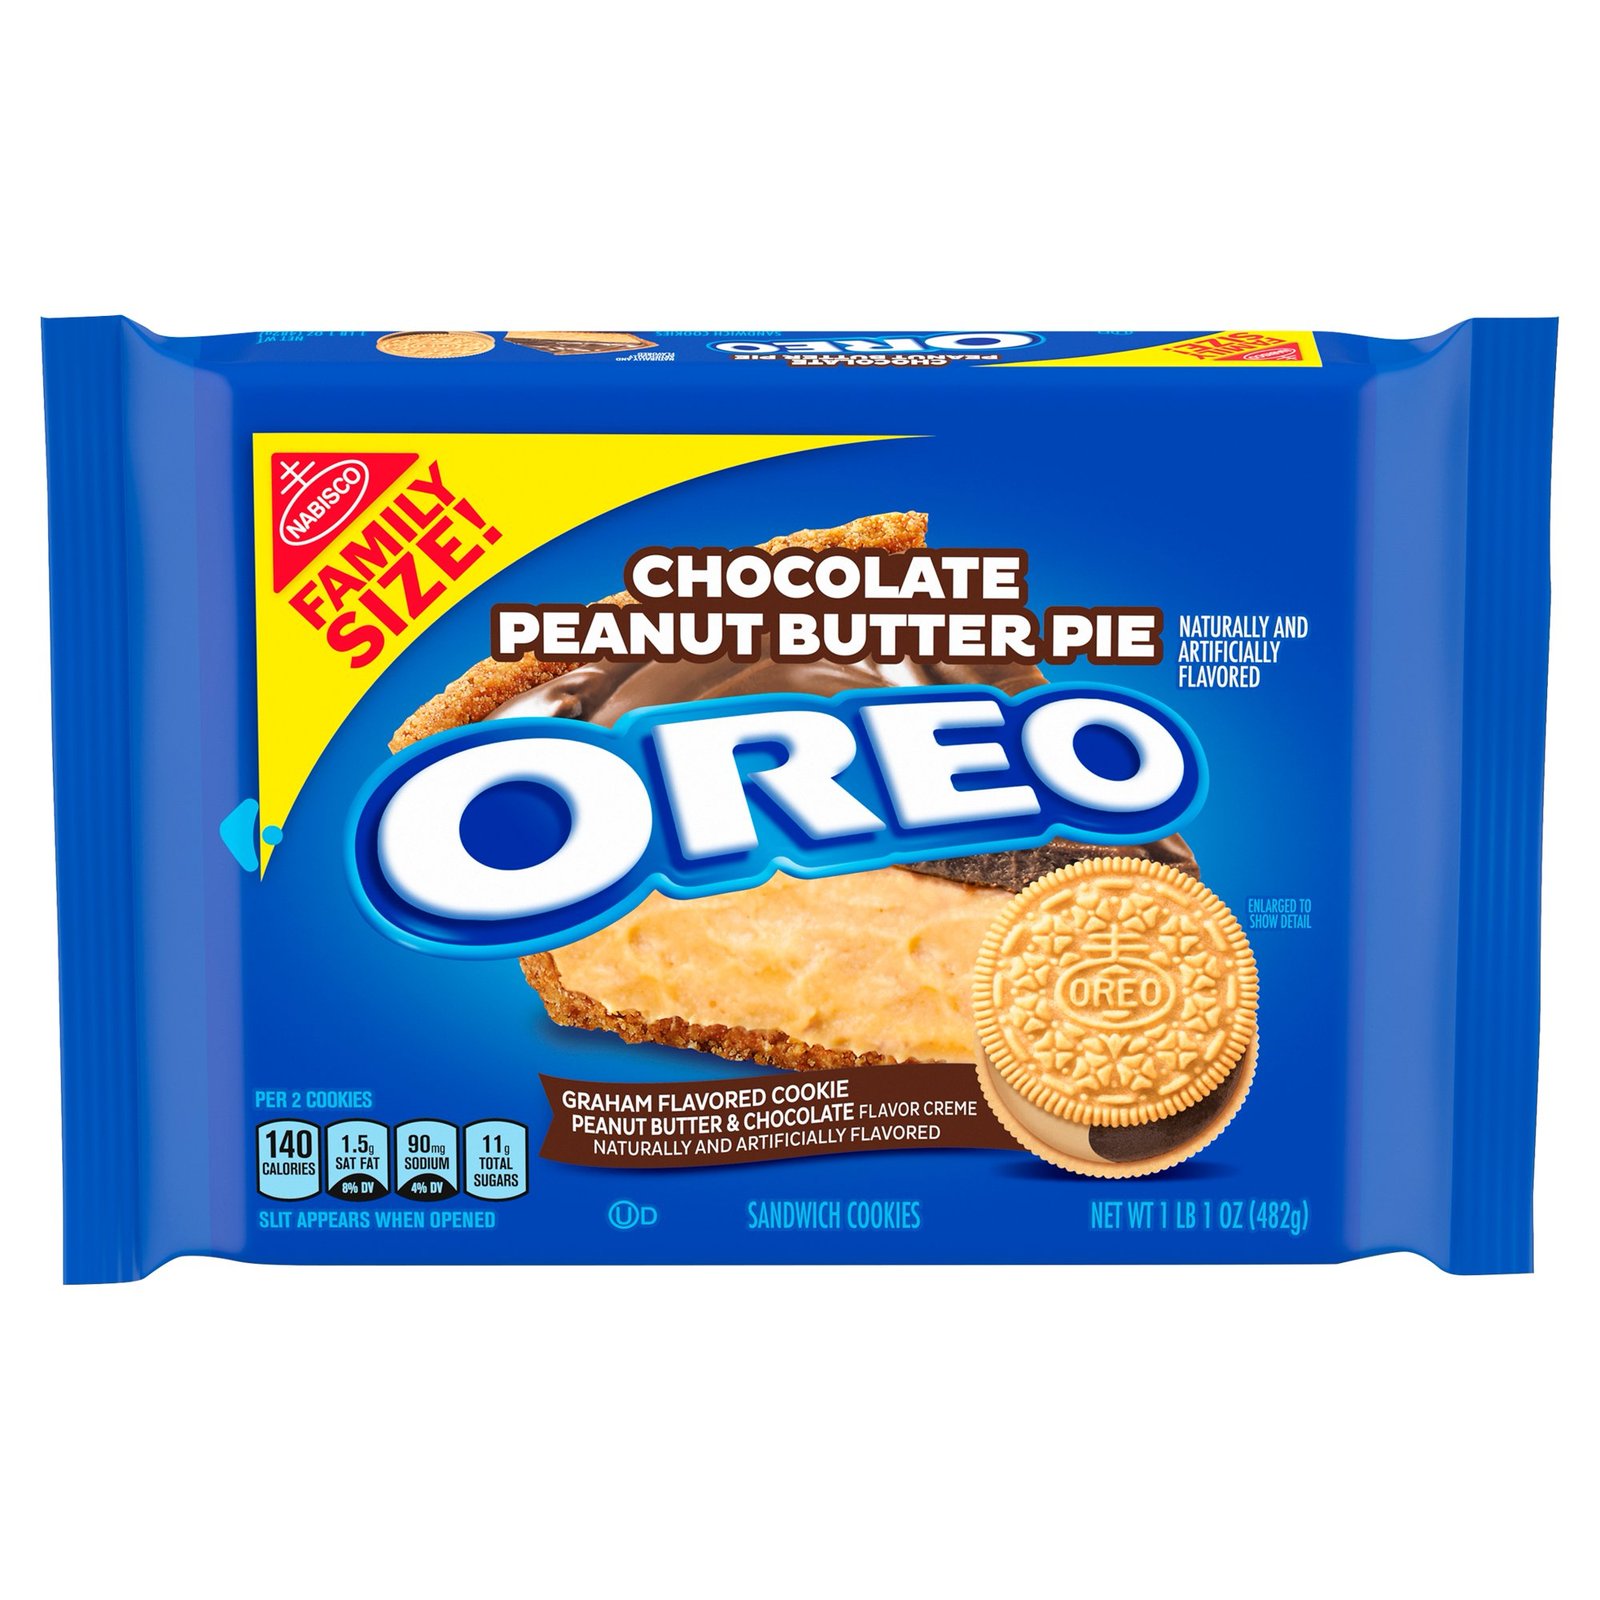 OREO Chocolate Peanut Butter Pie Sandwich Cookies Family Size Pack - 17 oz.